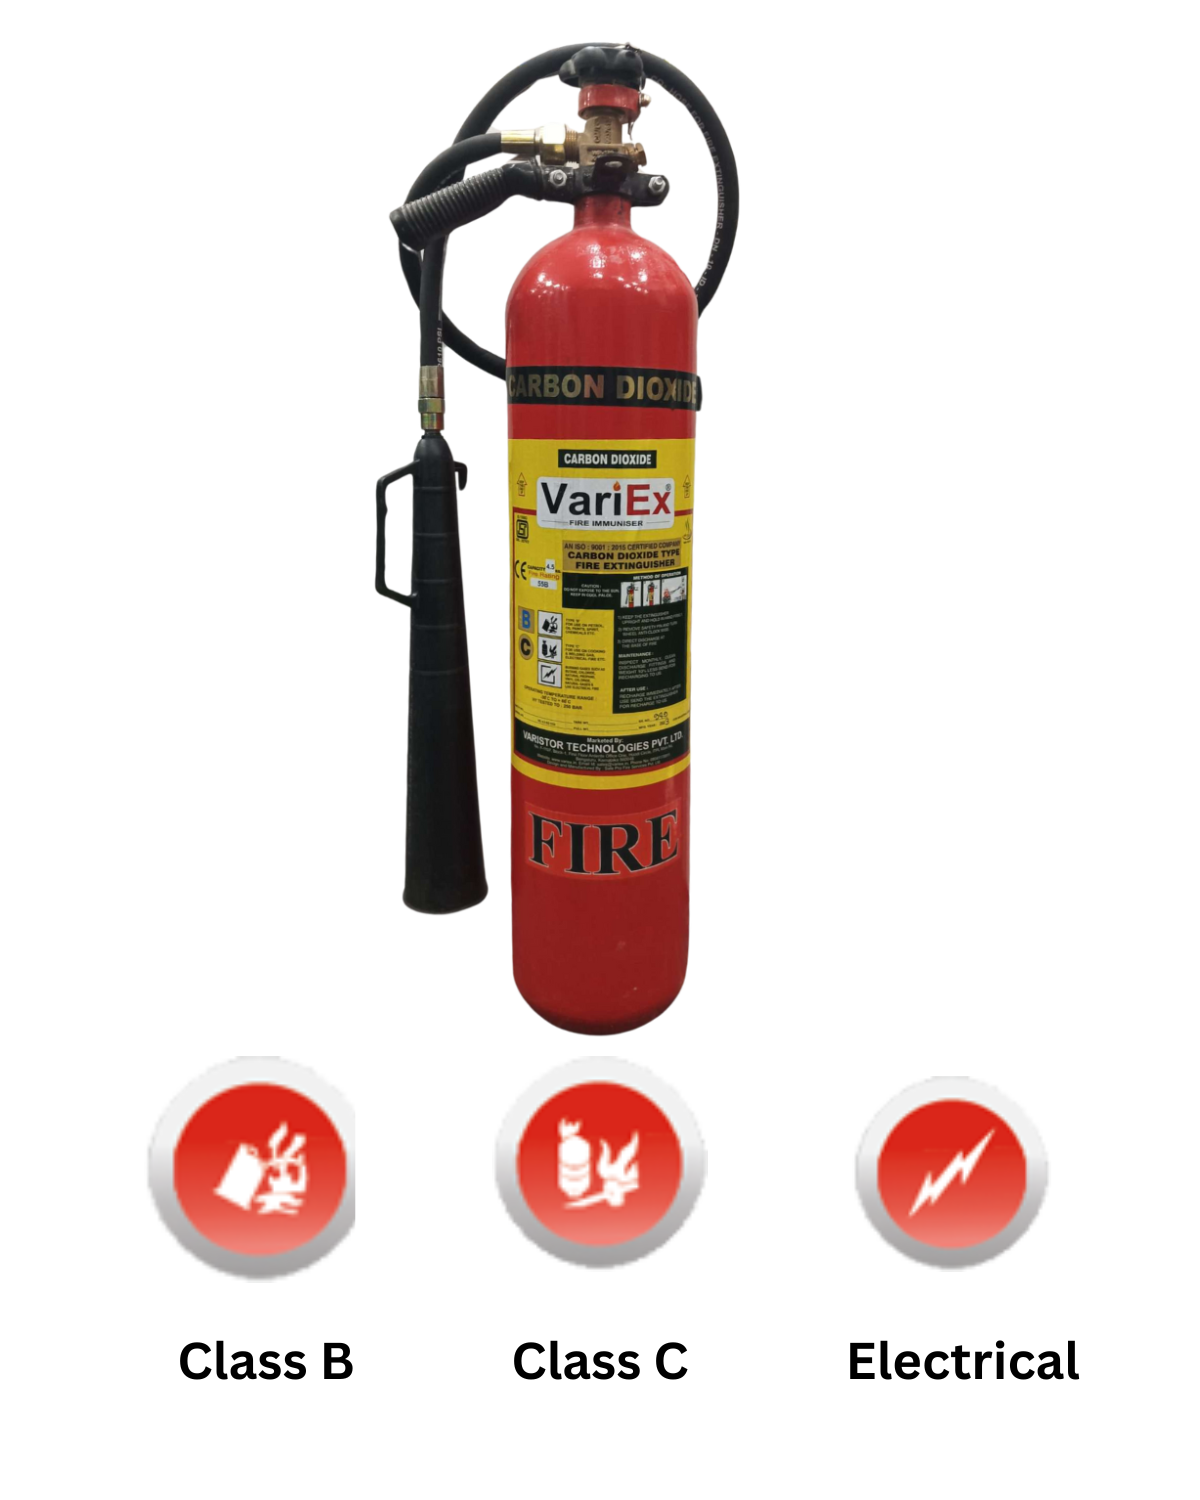 CO2 fire extinguishers